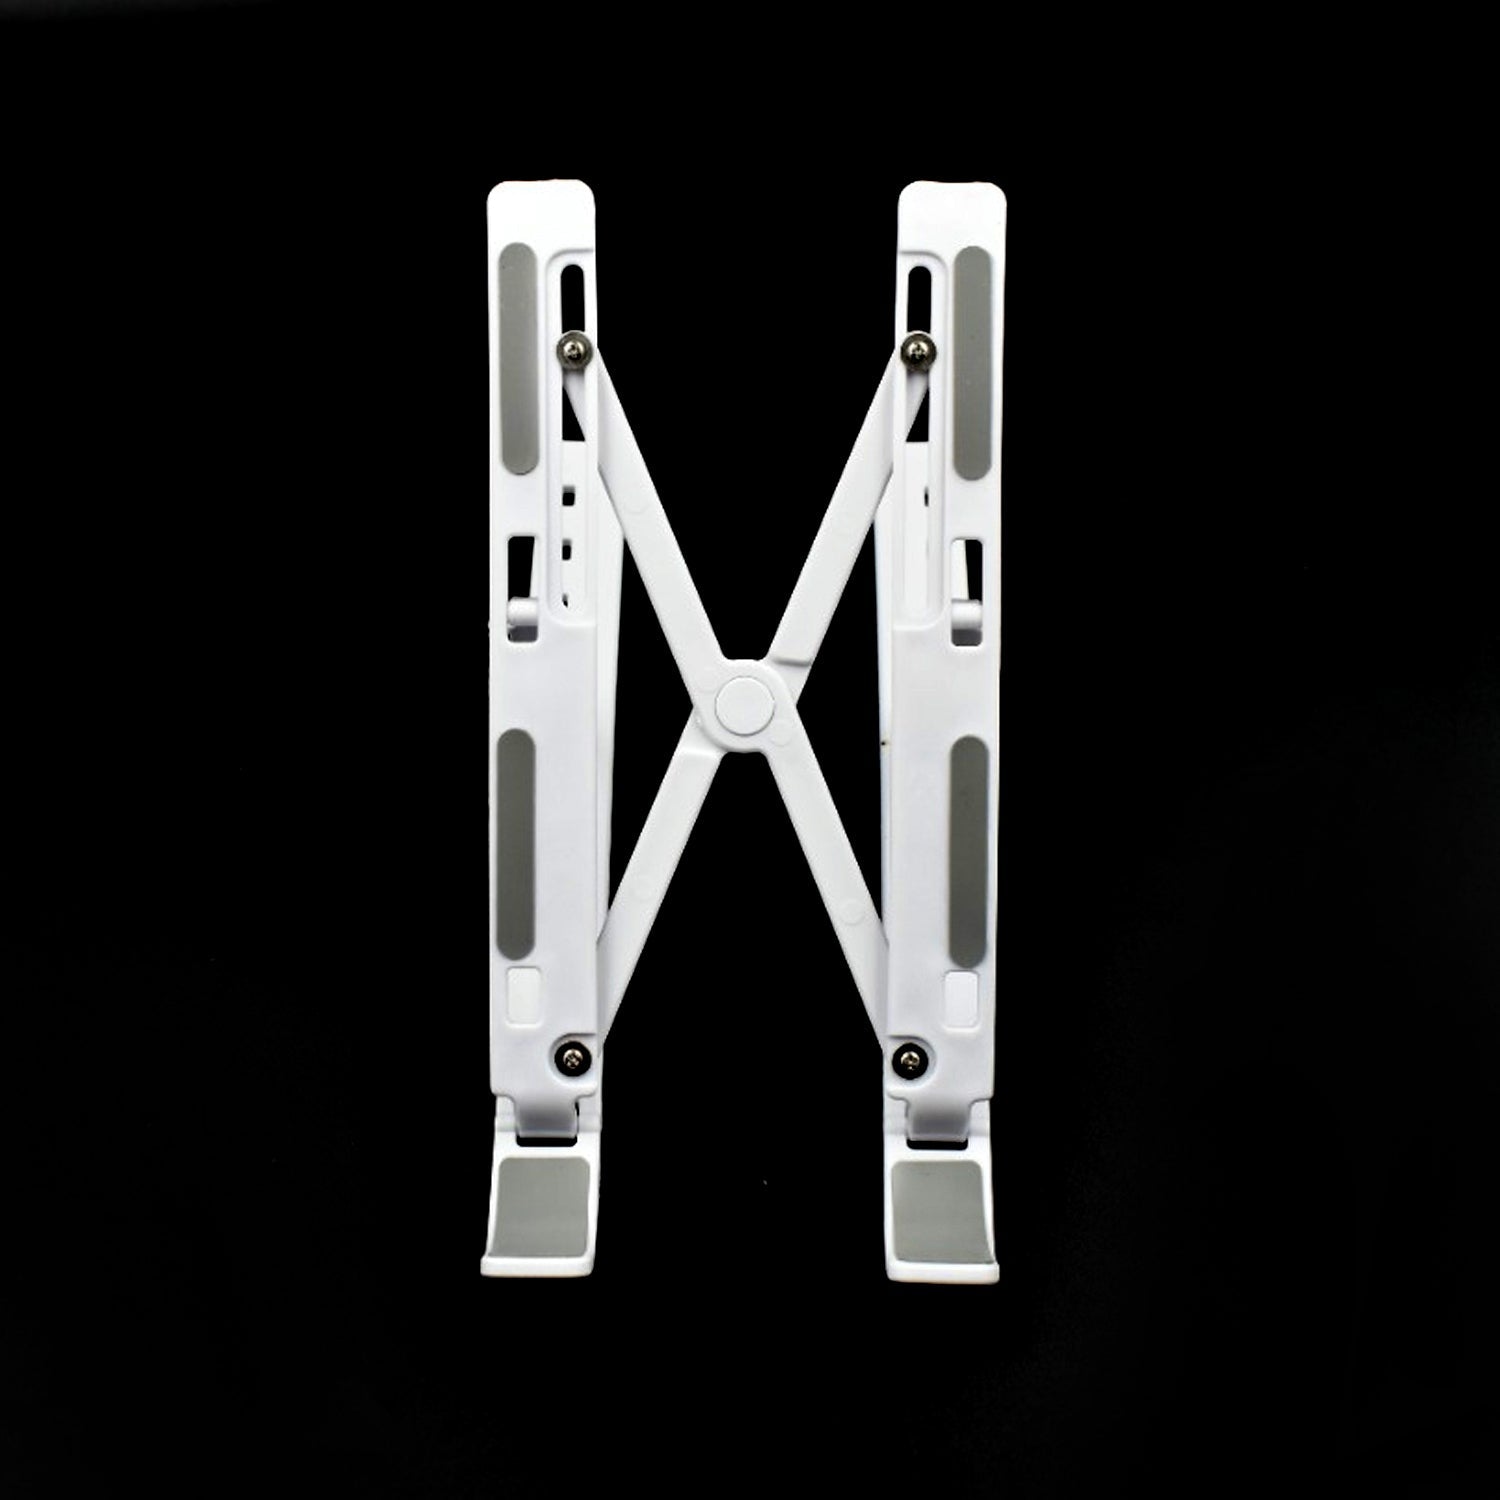 1320 Adjustable Laptop Stand Holder with Built-in Foldable Legs and High Quality Fibre